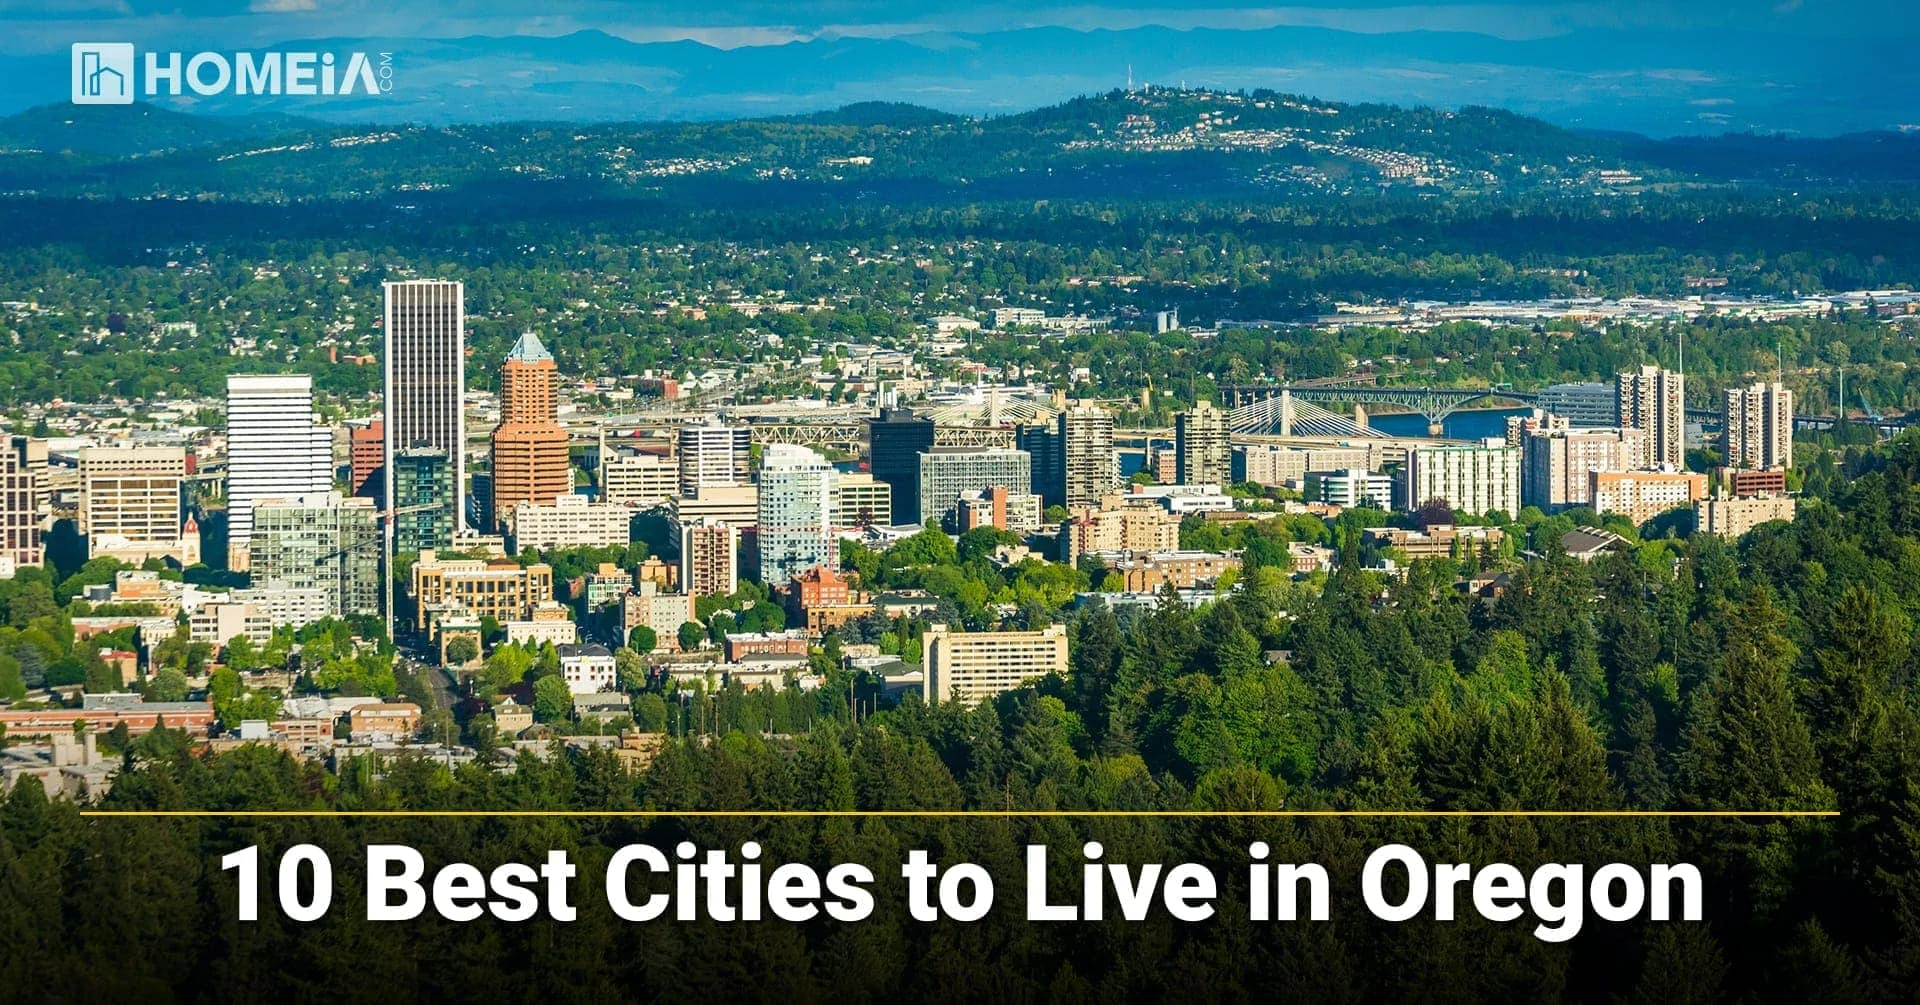 10 Best Places You Should Consider Before Moving to Oregon